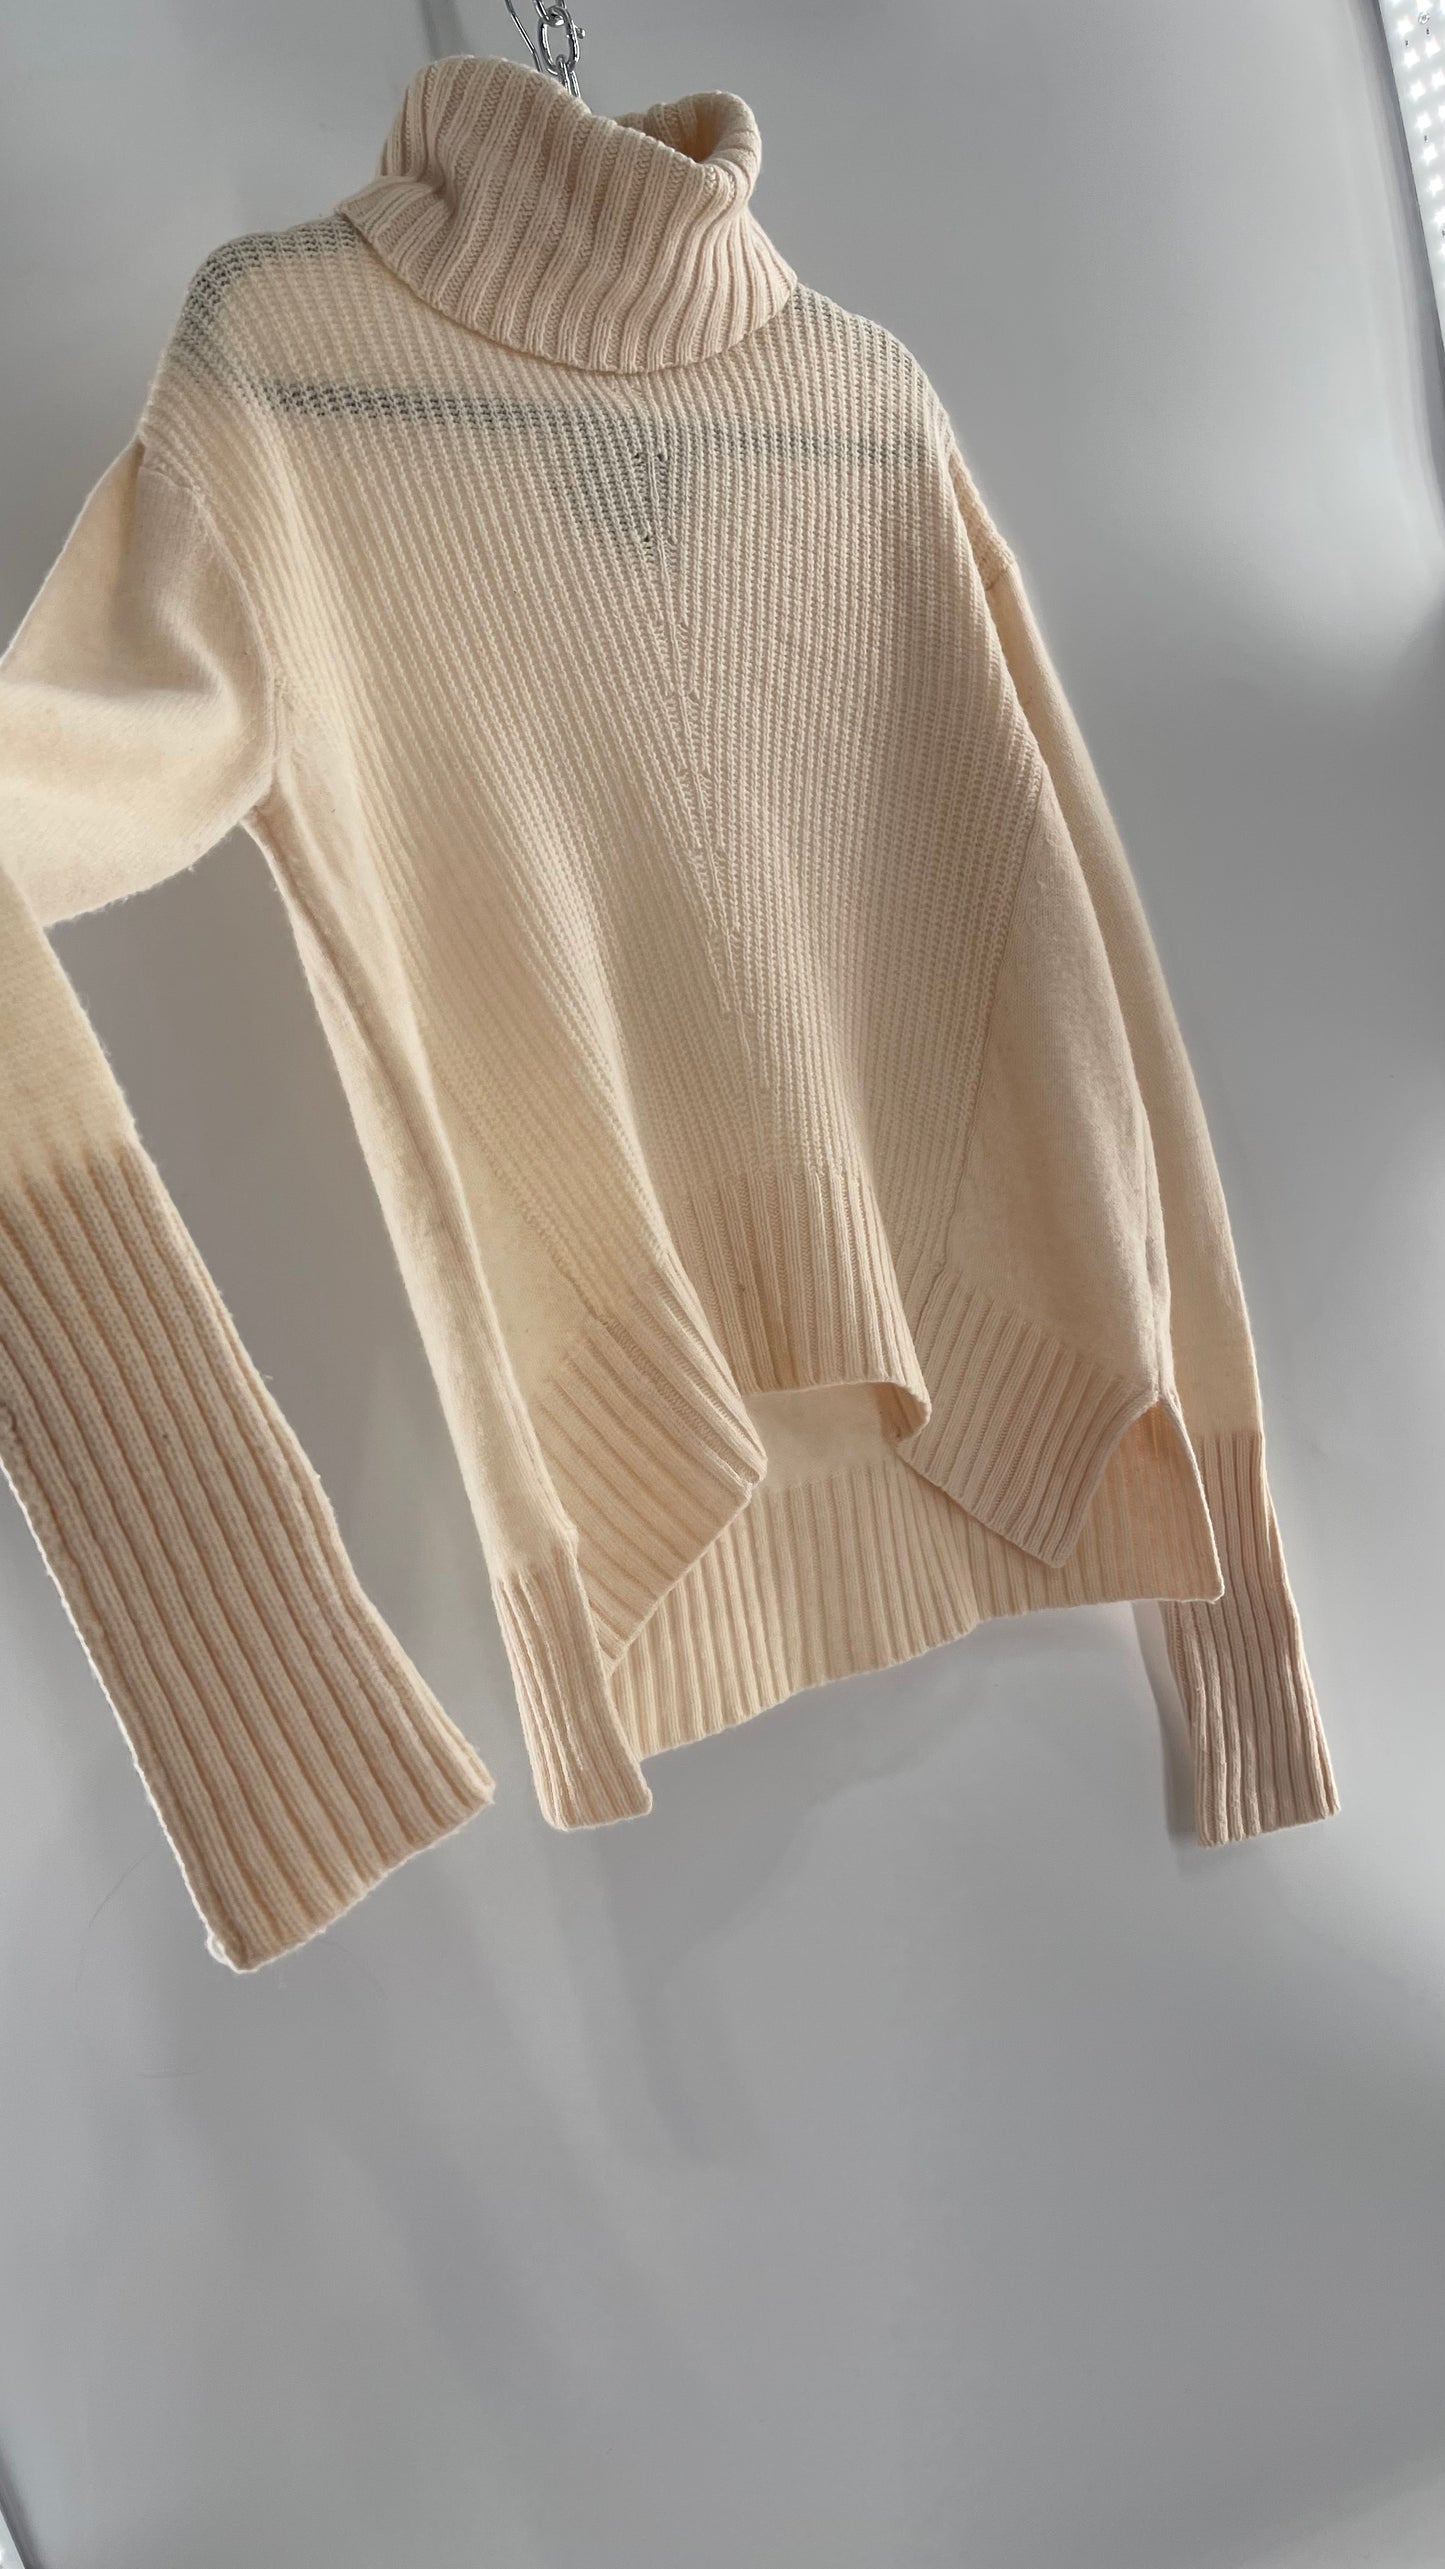 MOTH Anthropologie 80% Wool Ivory Off White Knit Turtle Neck Sweater  (Small)